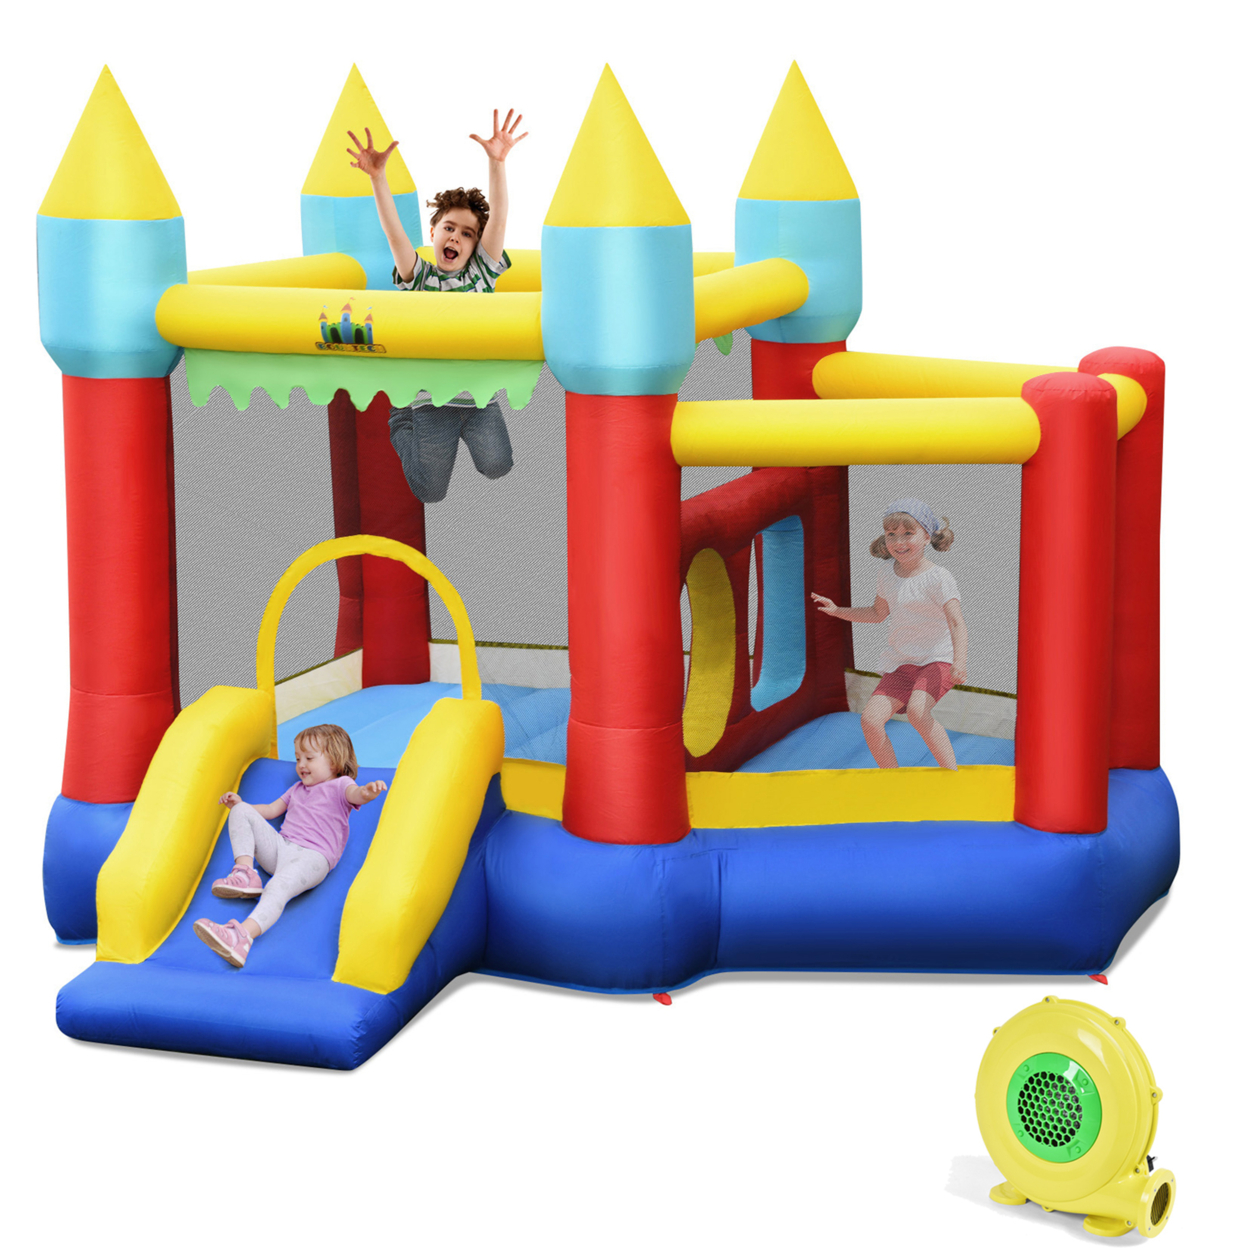 Inflatable Bounce House Slide Jumping Castle W/ Tunnels Ball Pit & 480W Blower